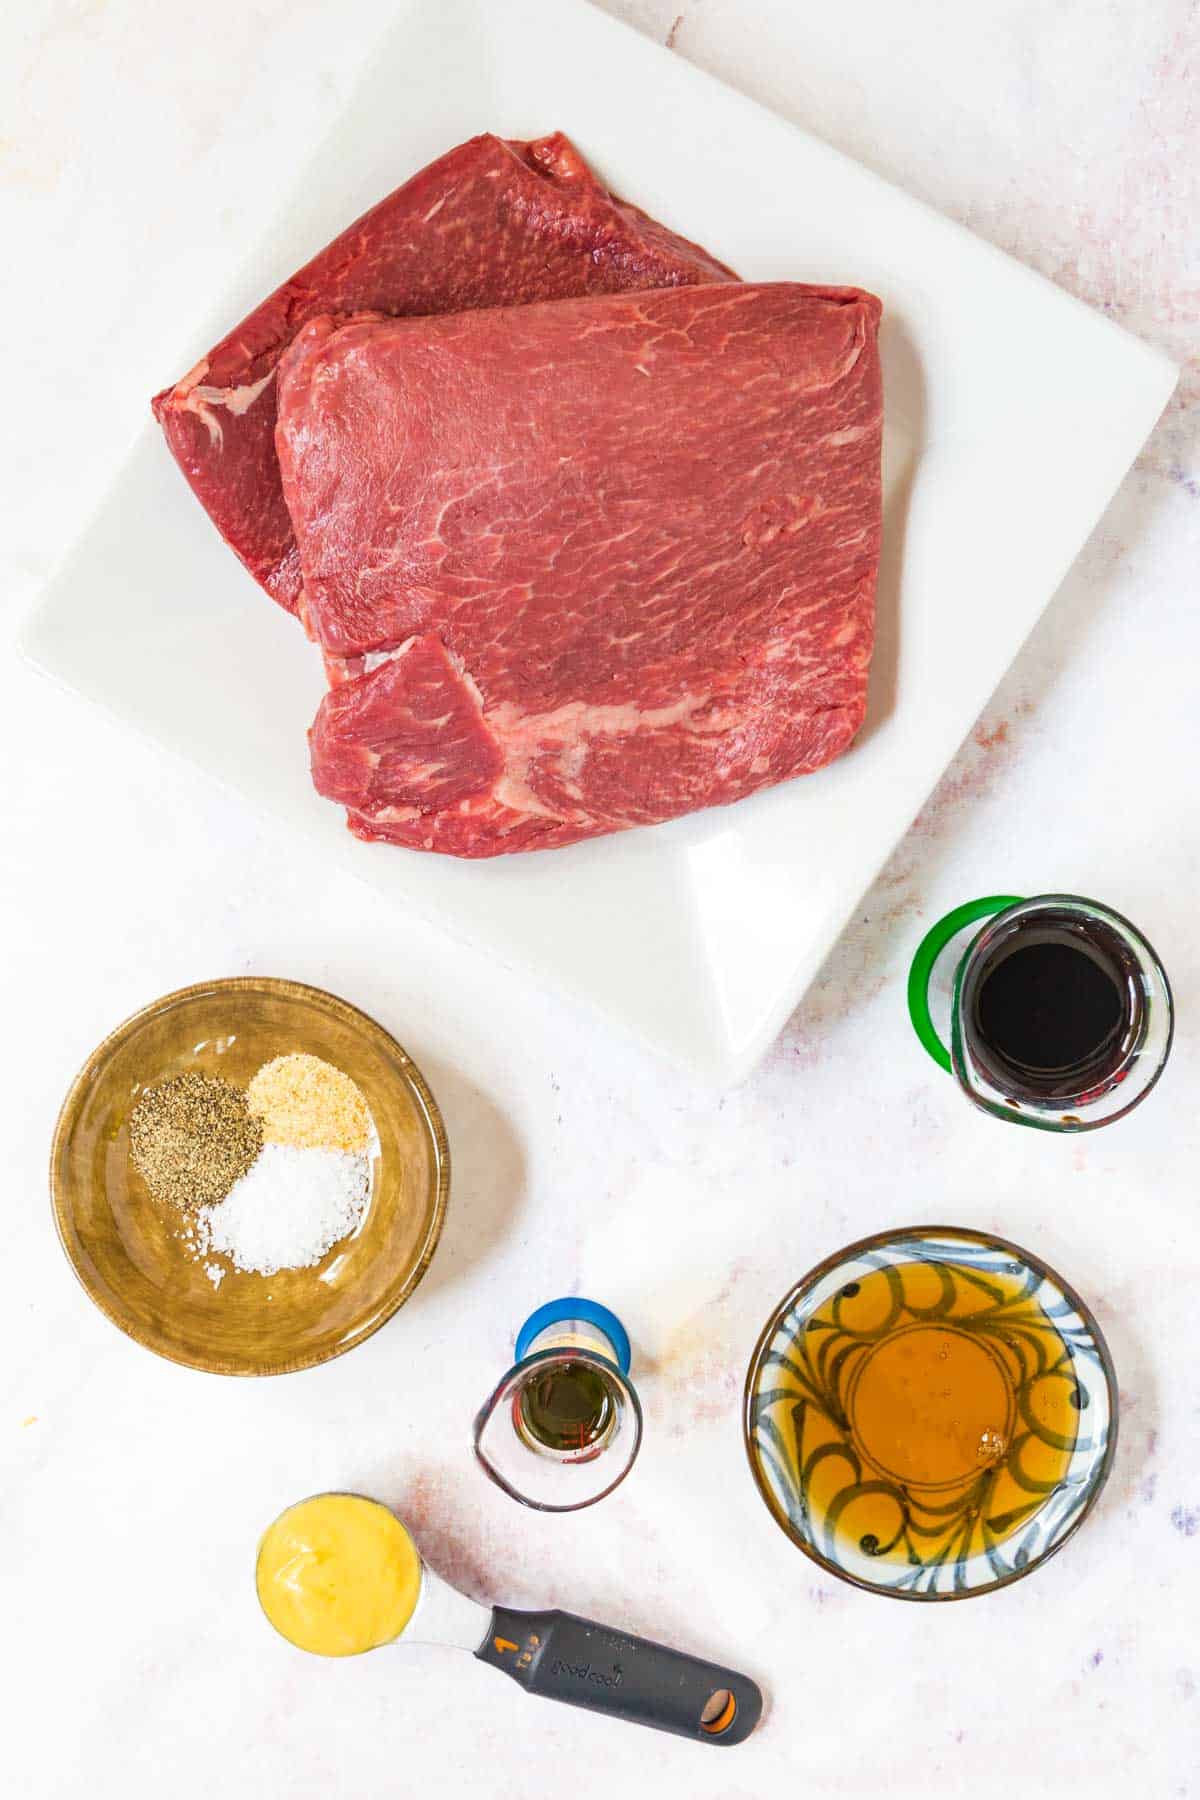 raw steaks on a plate with containers of balsamic vinegar, olive oil, honey, dijon mustard, and spices on a marble tabletop